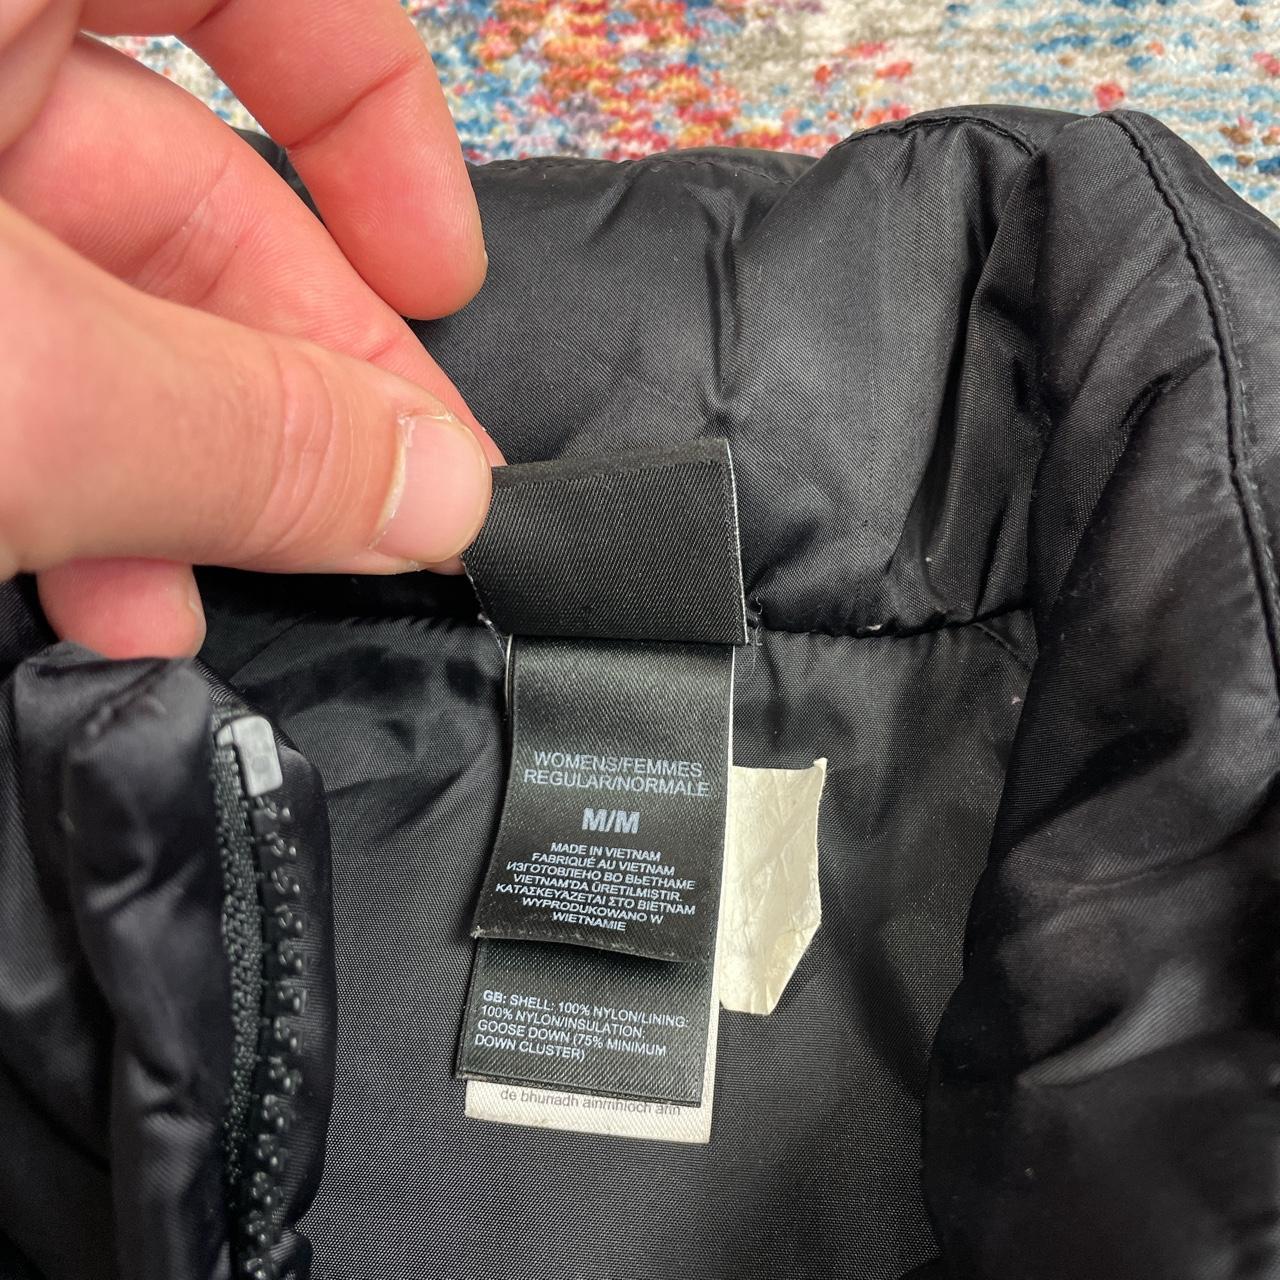 The North Face 550 Black Puffer Gilet